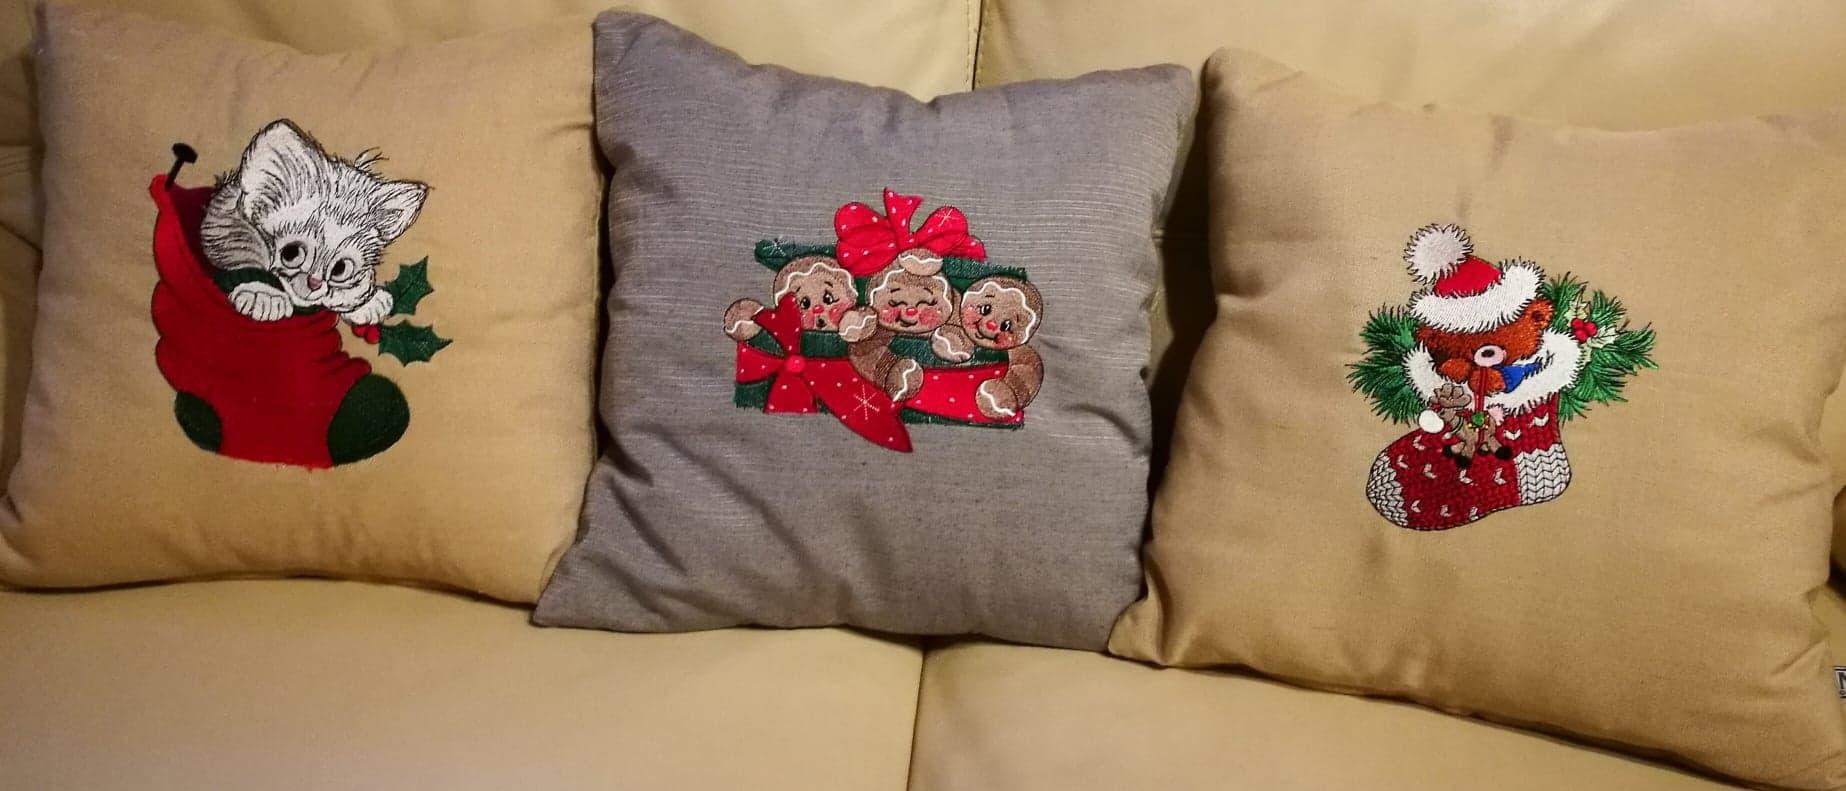 Embroidered set of cushions with Cristmas designs